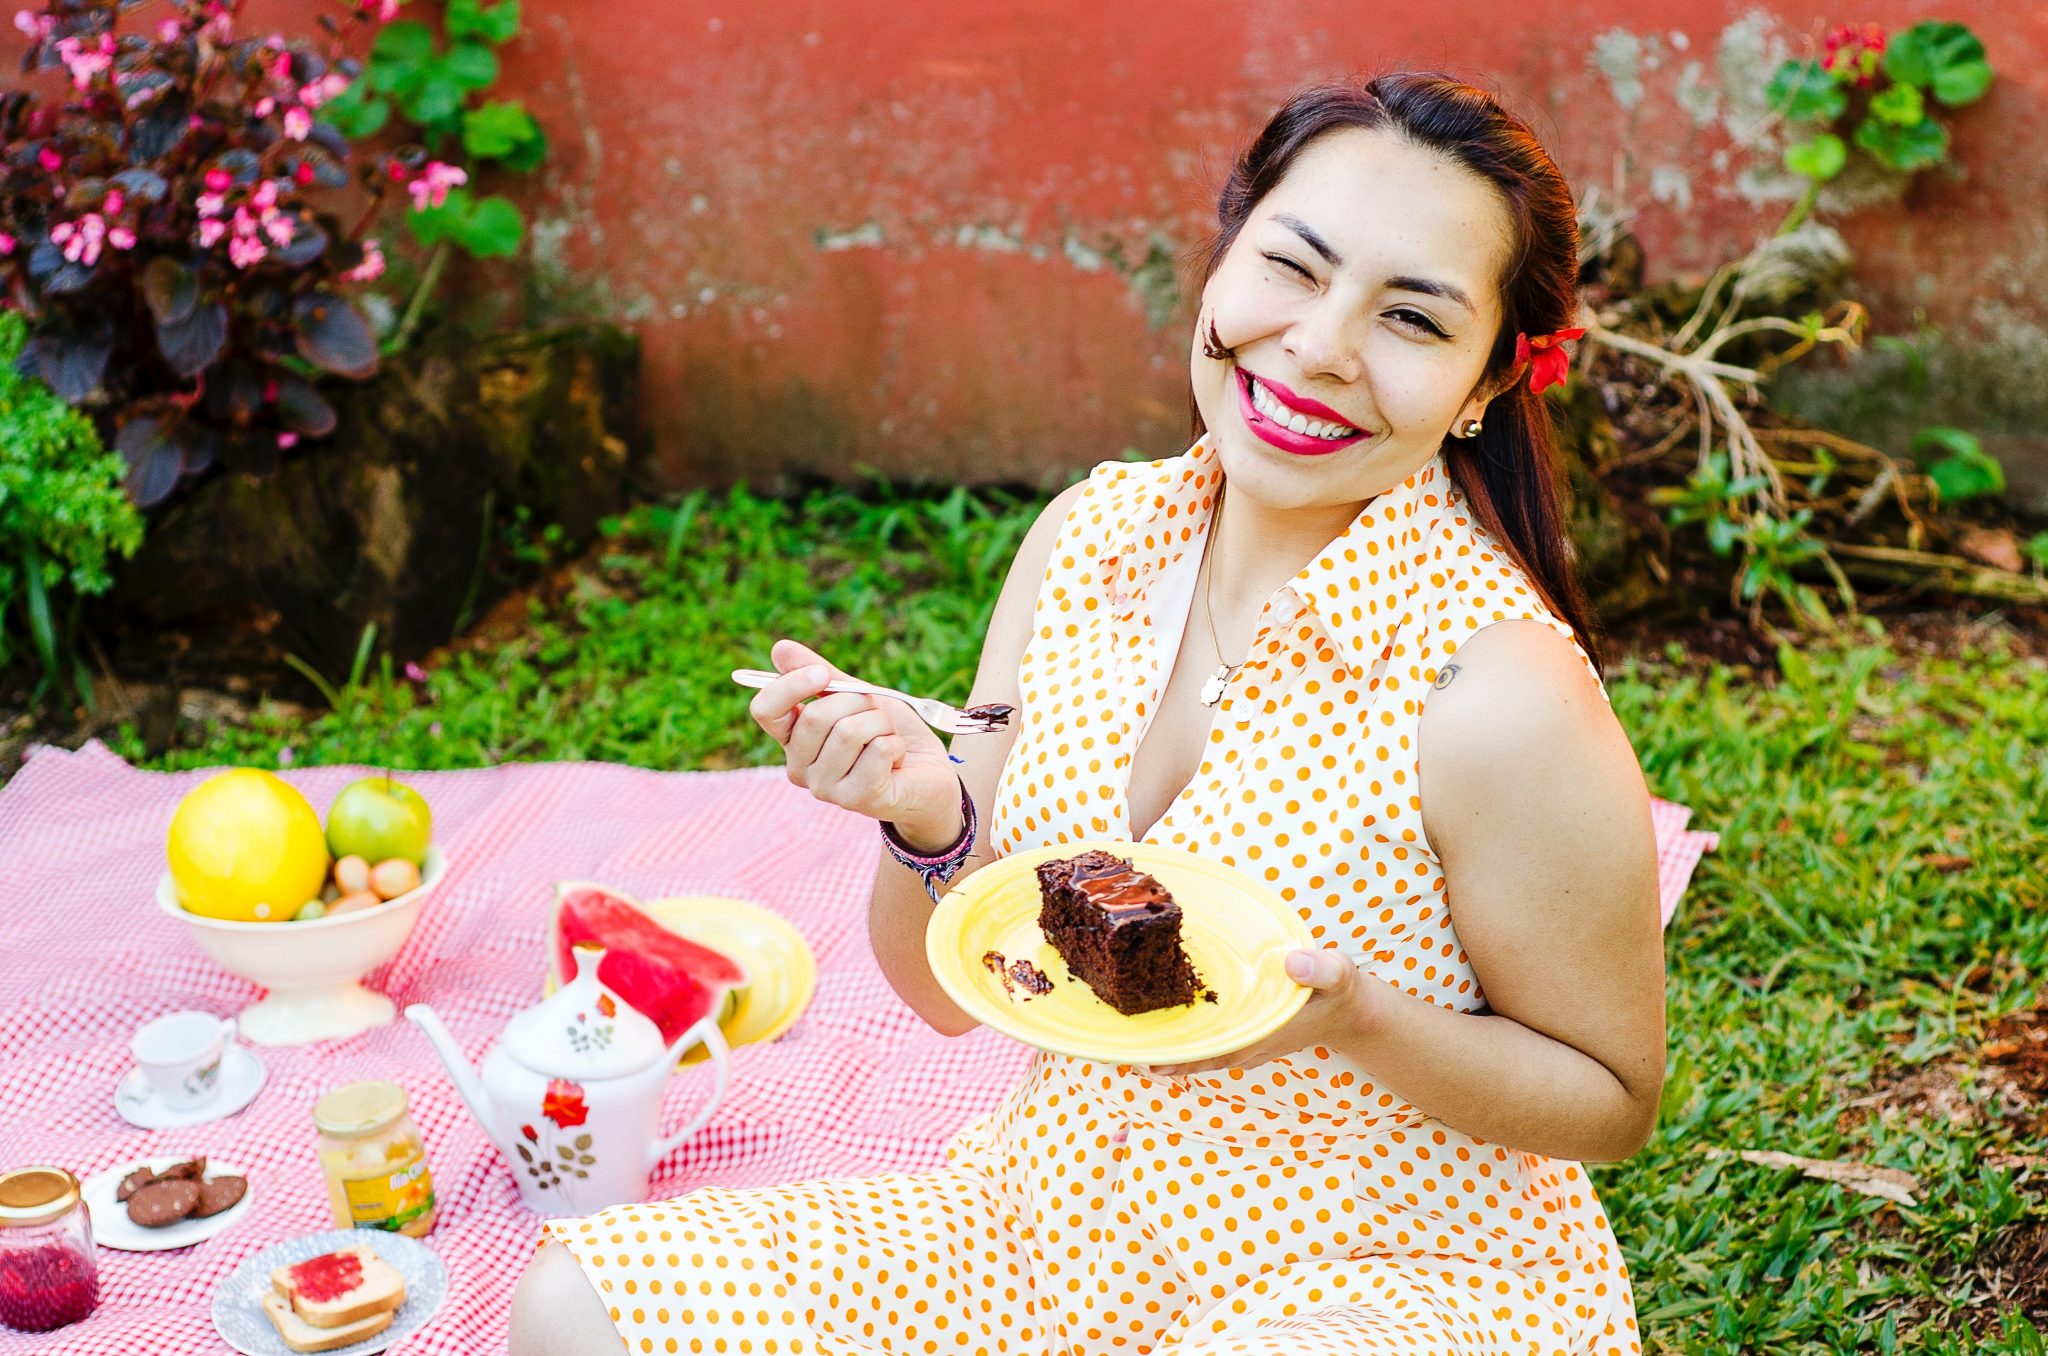 Lady eating cake on a picnic blanket smiling